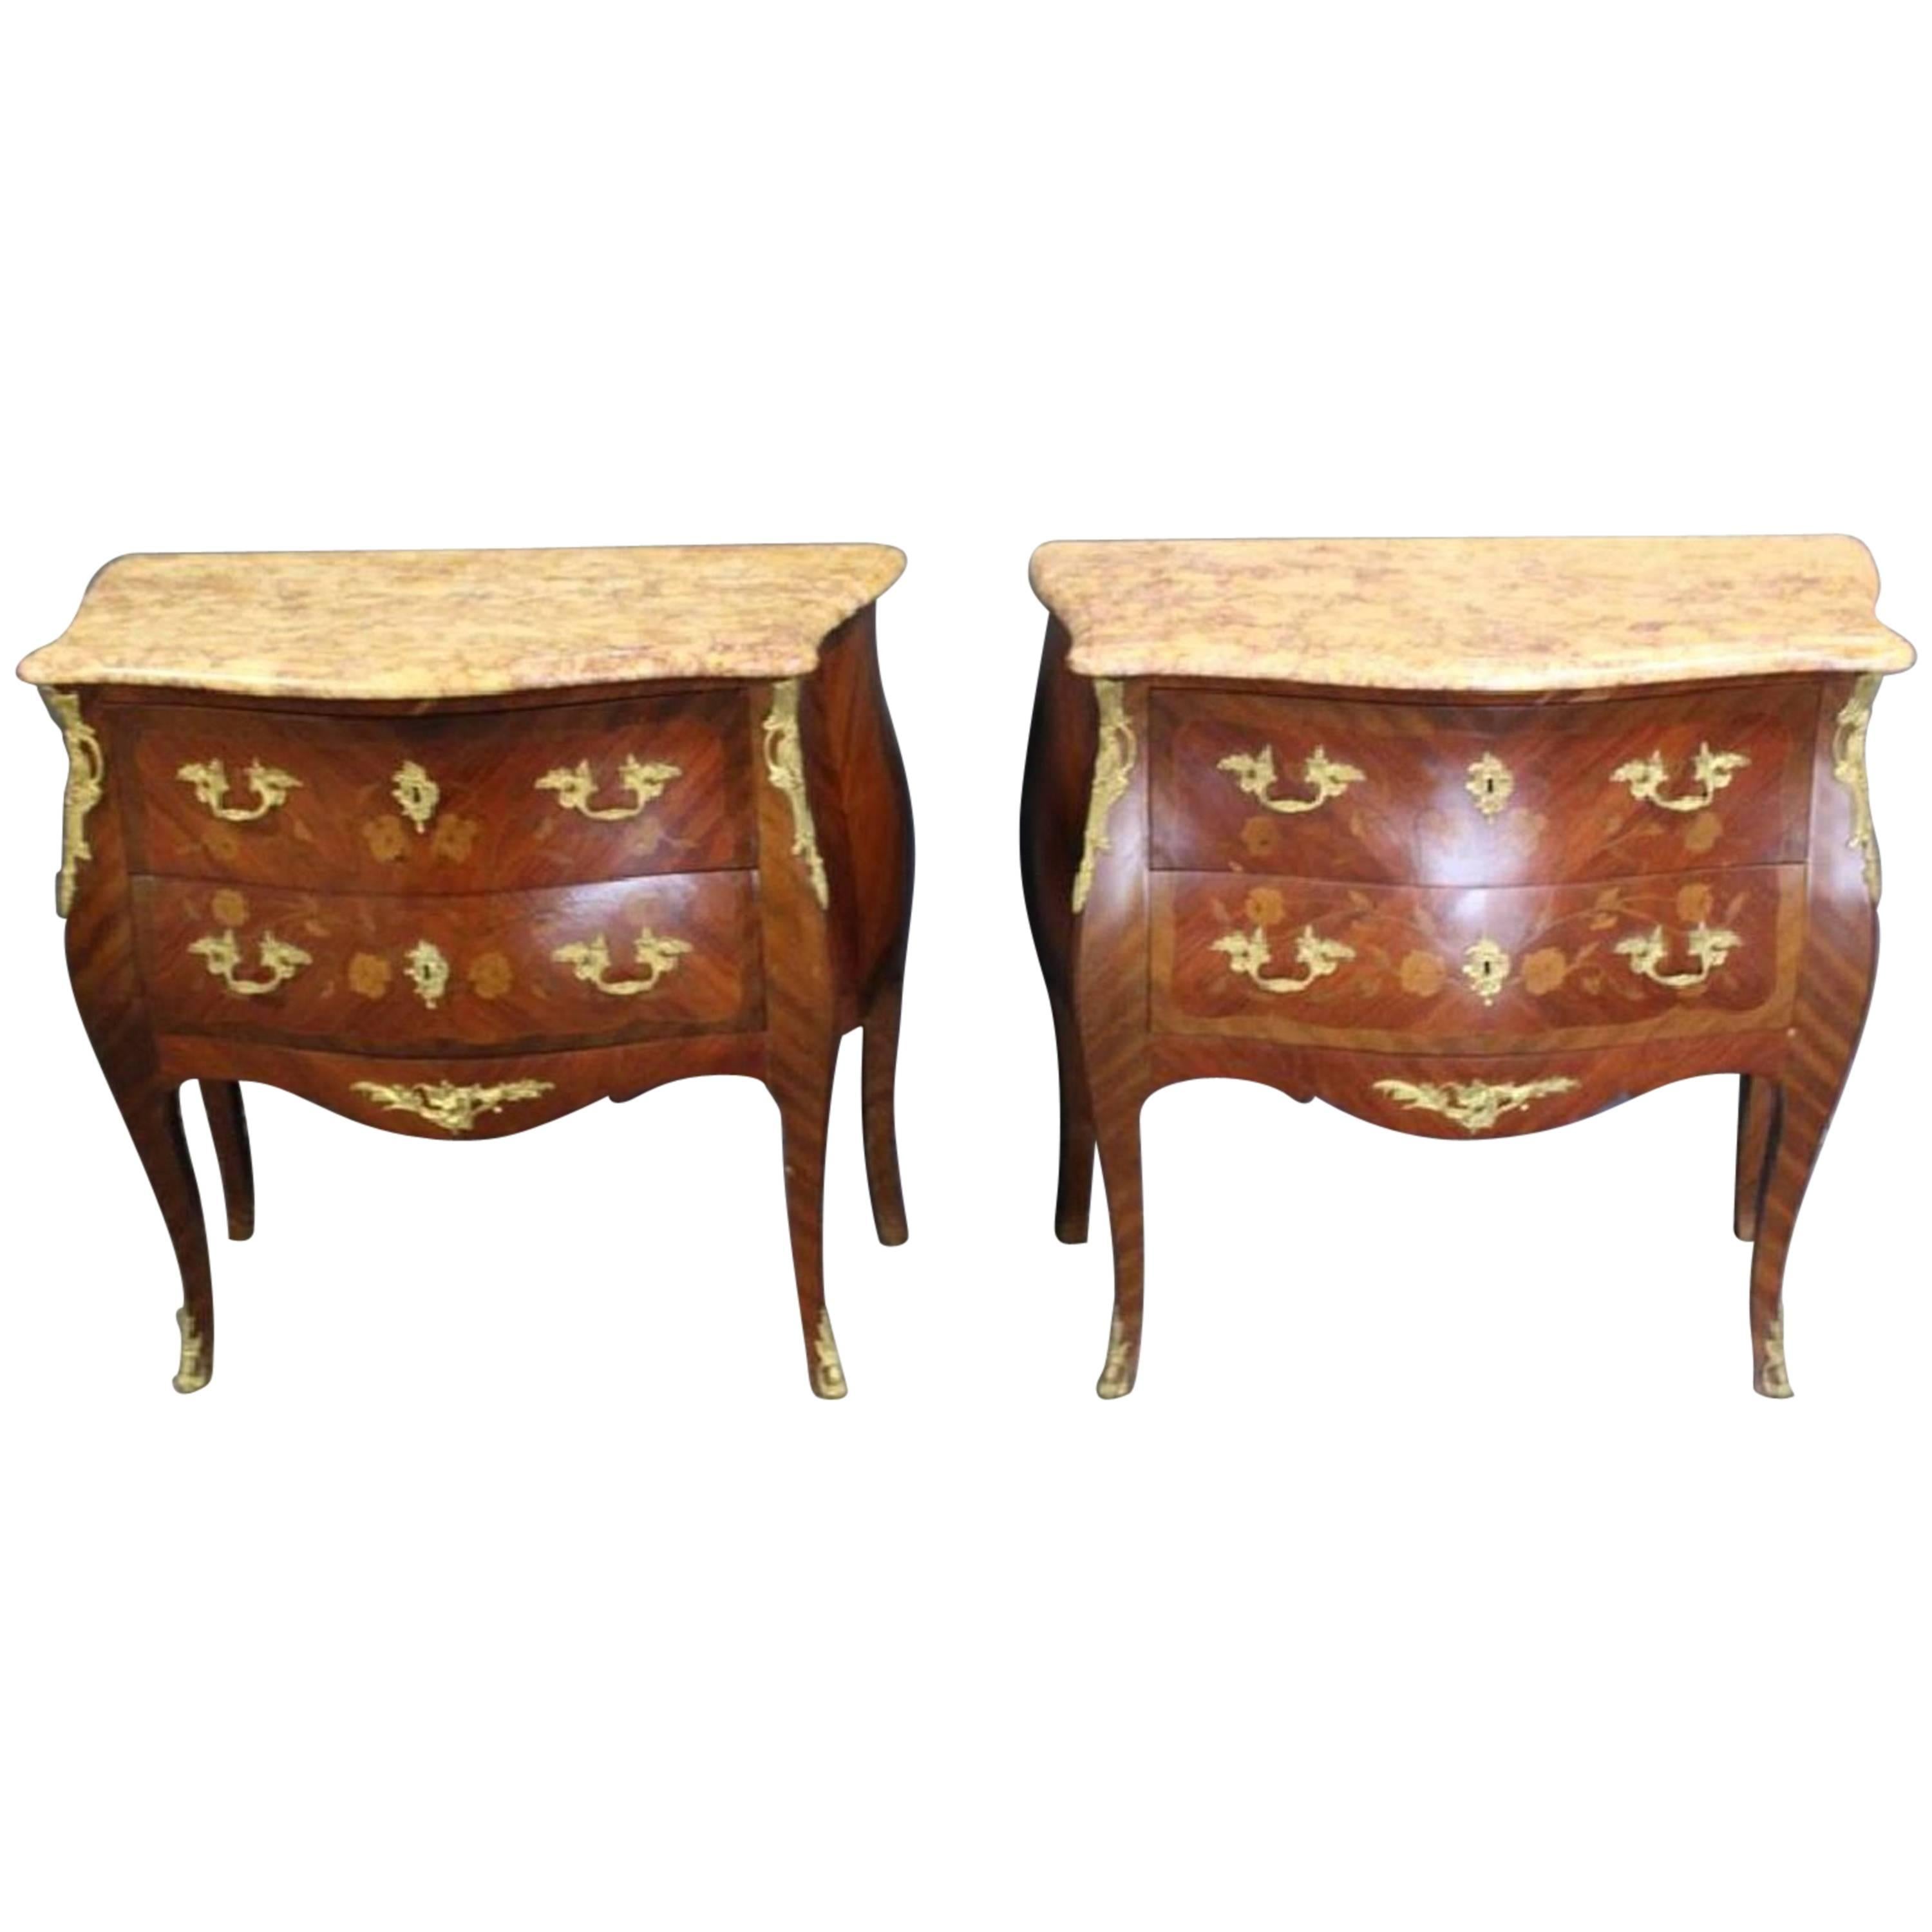 Pair of Louis XV Style Bronze-Mounted Marble-Top Inlaid Bedside Commodes